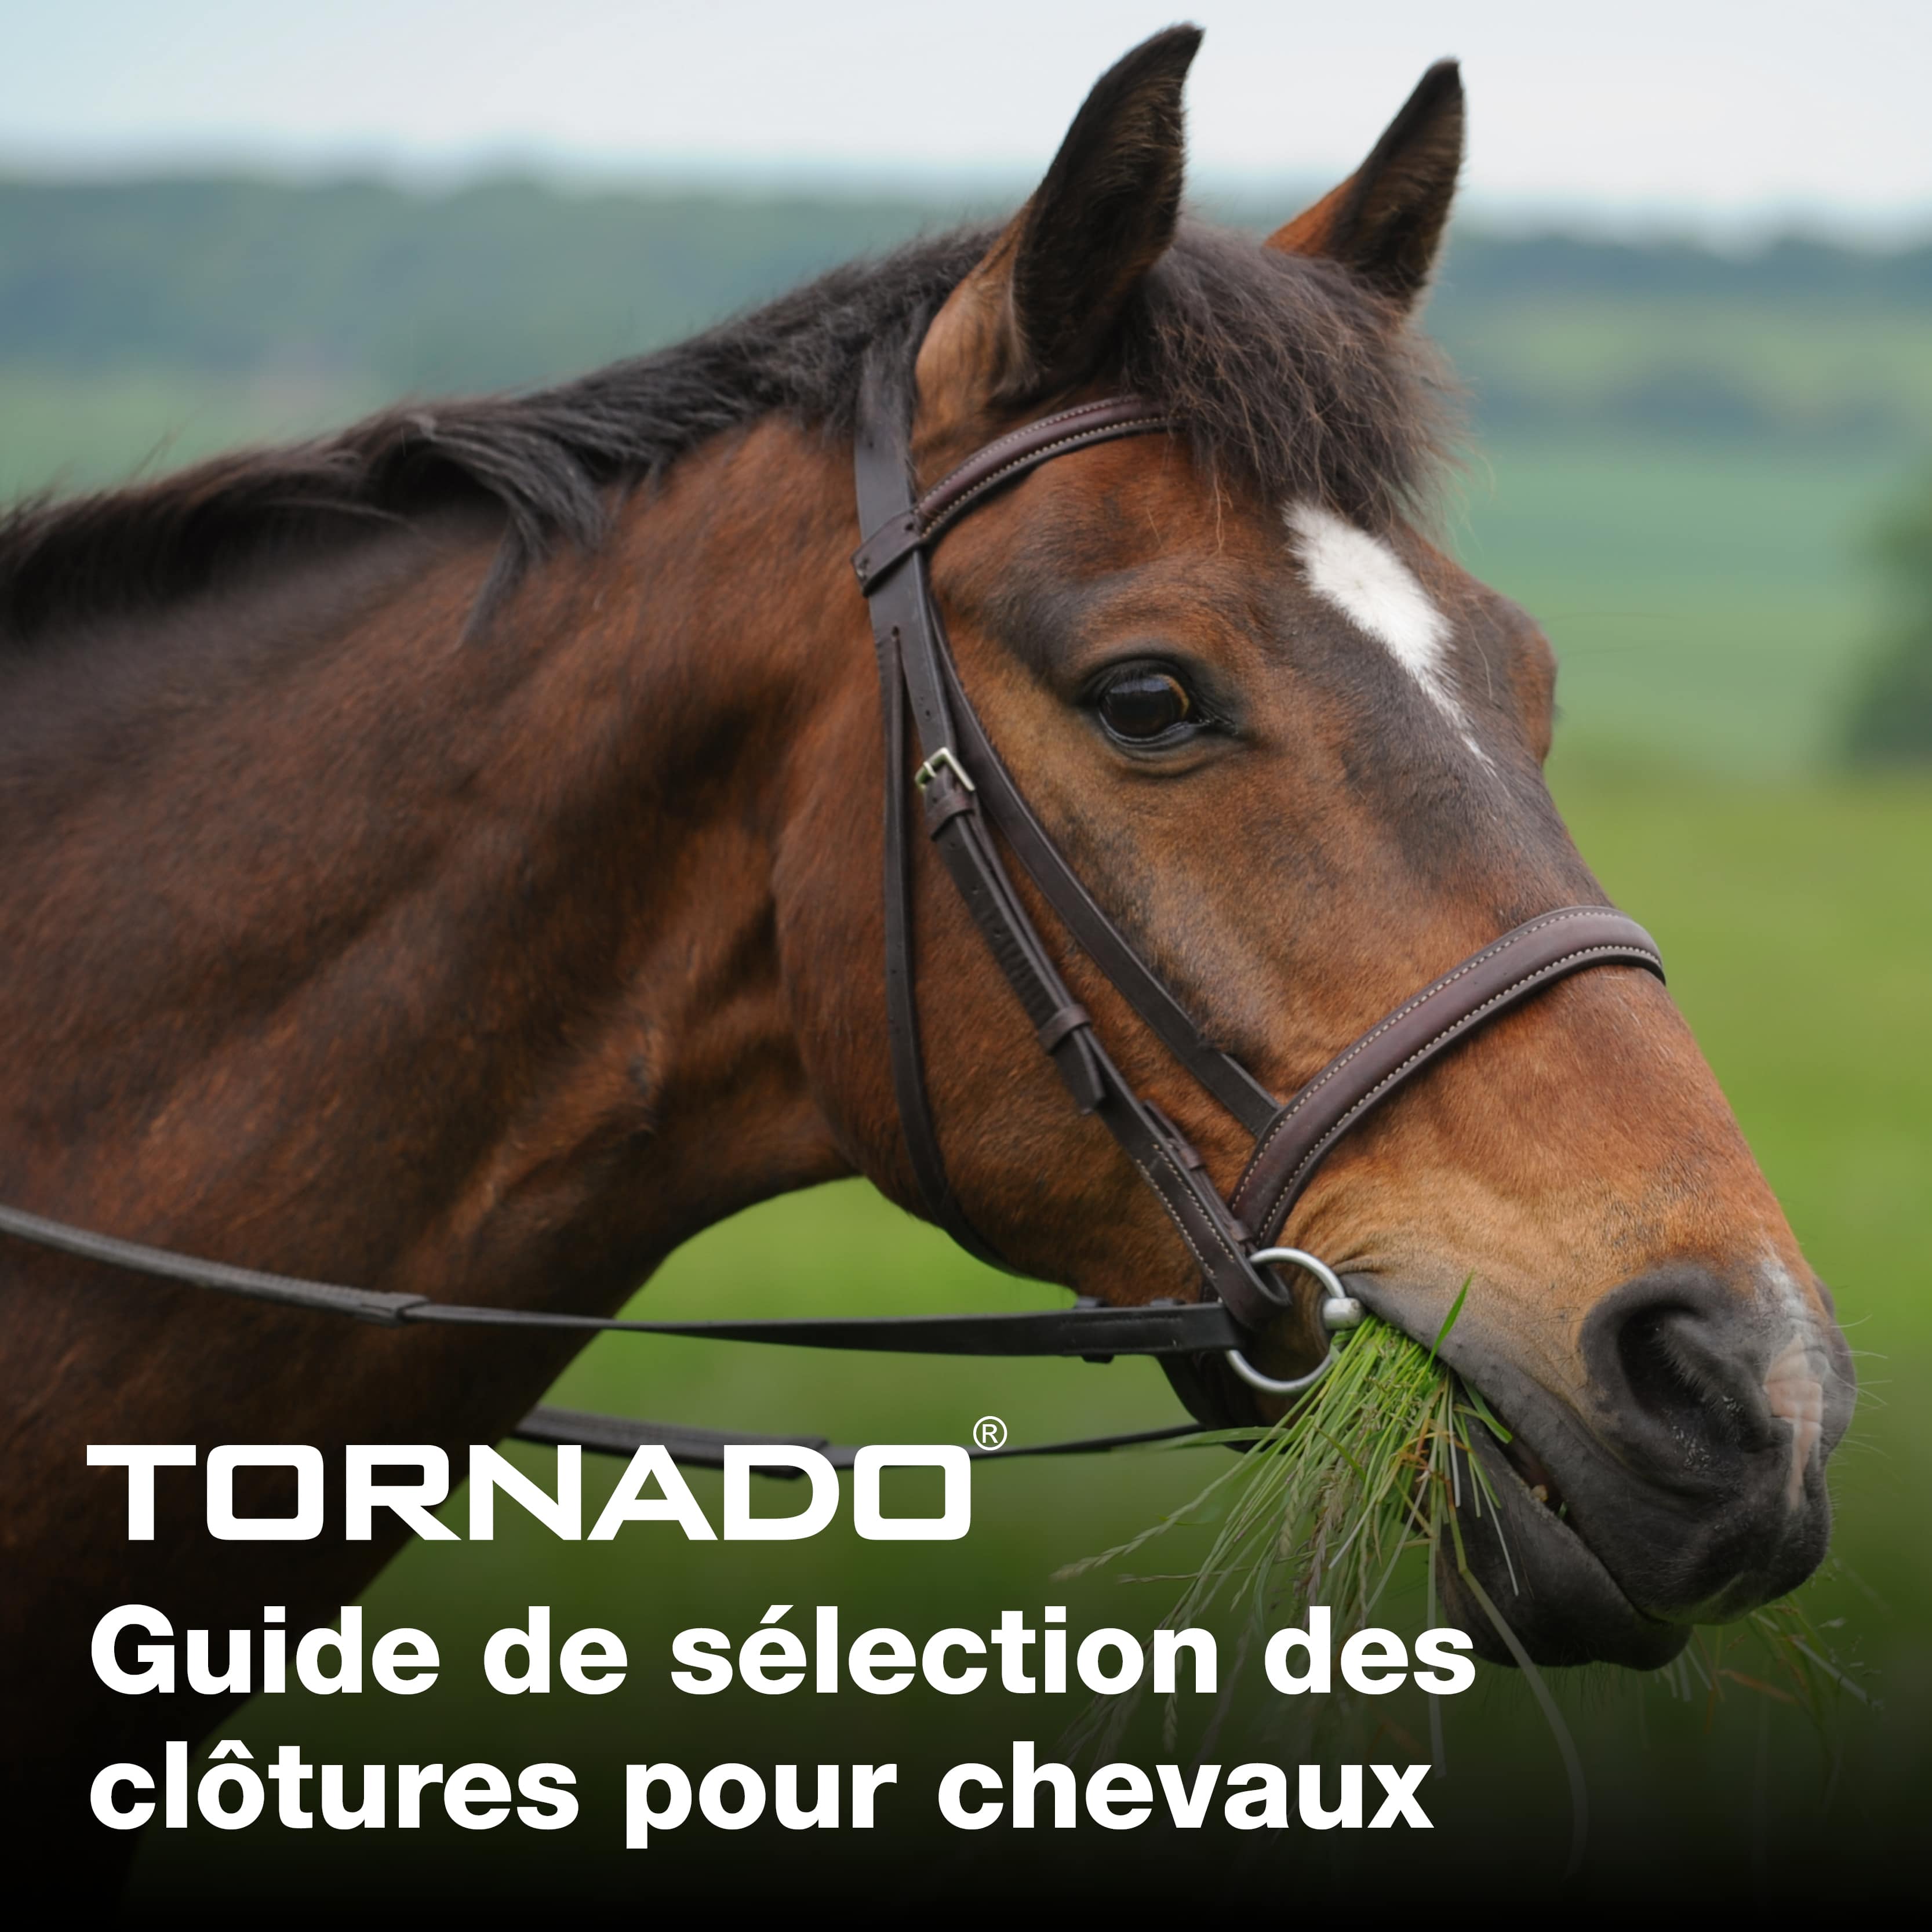 FRENCH Horse_selection_guide_main